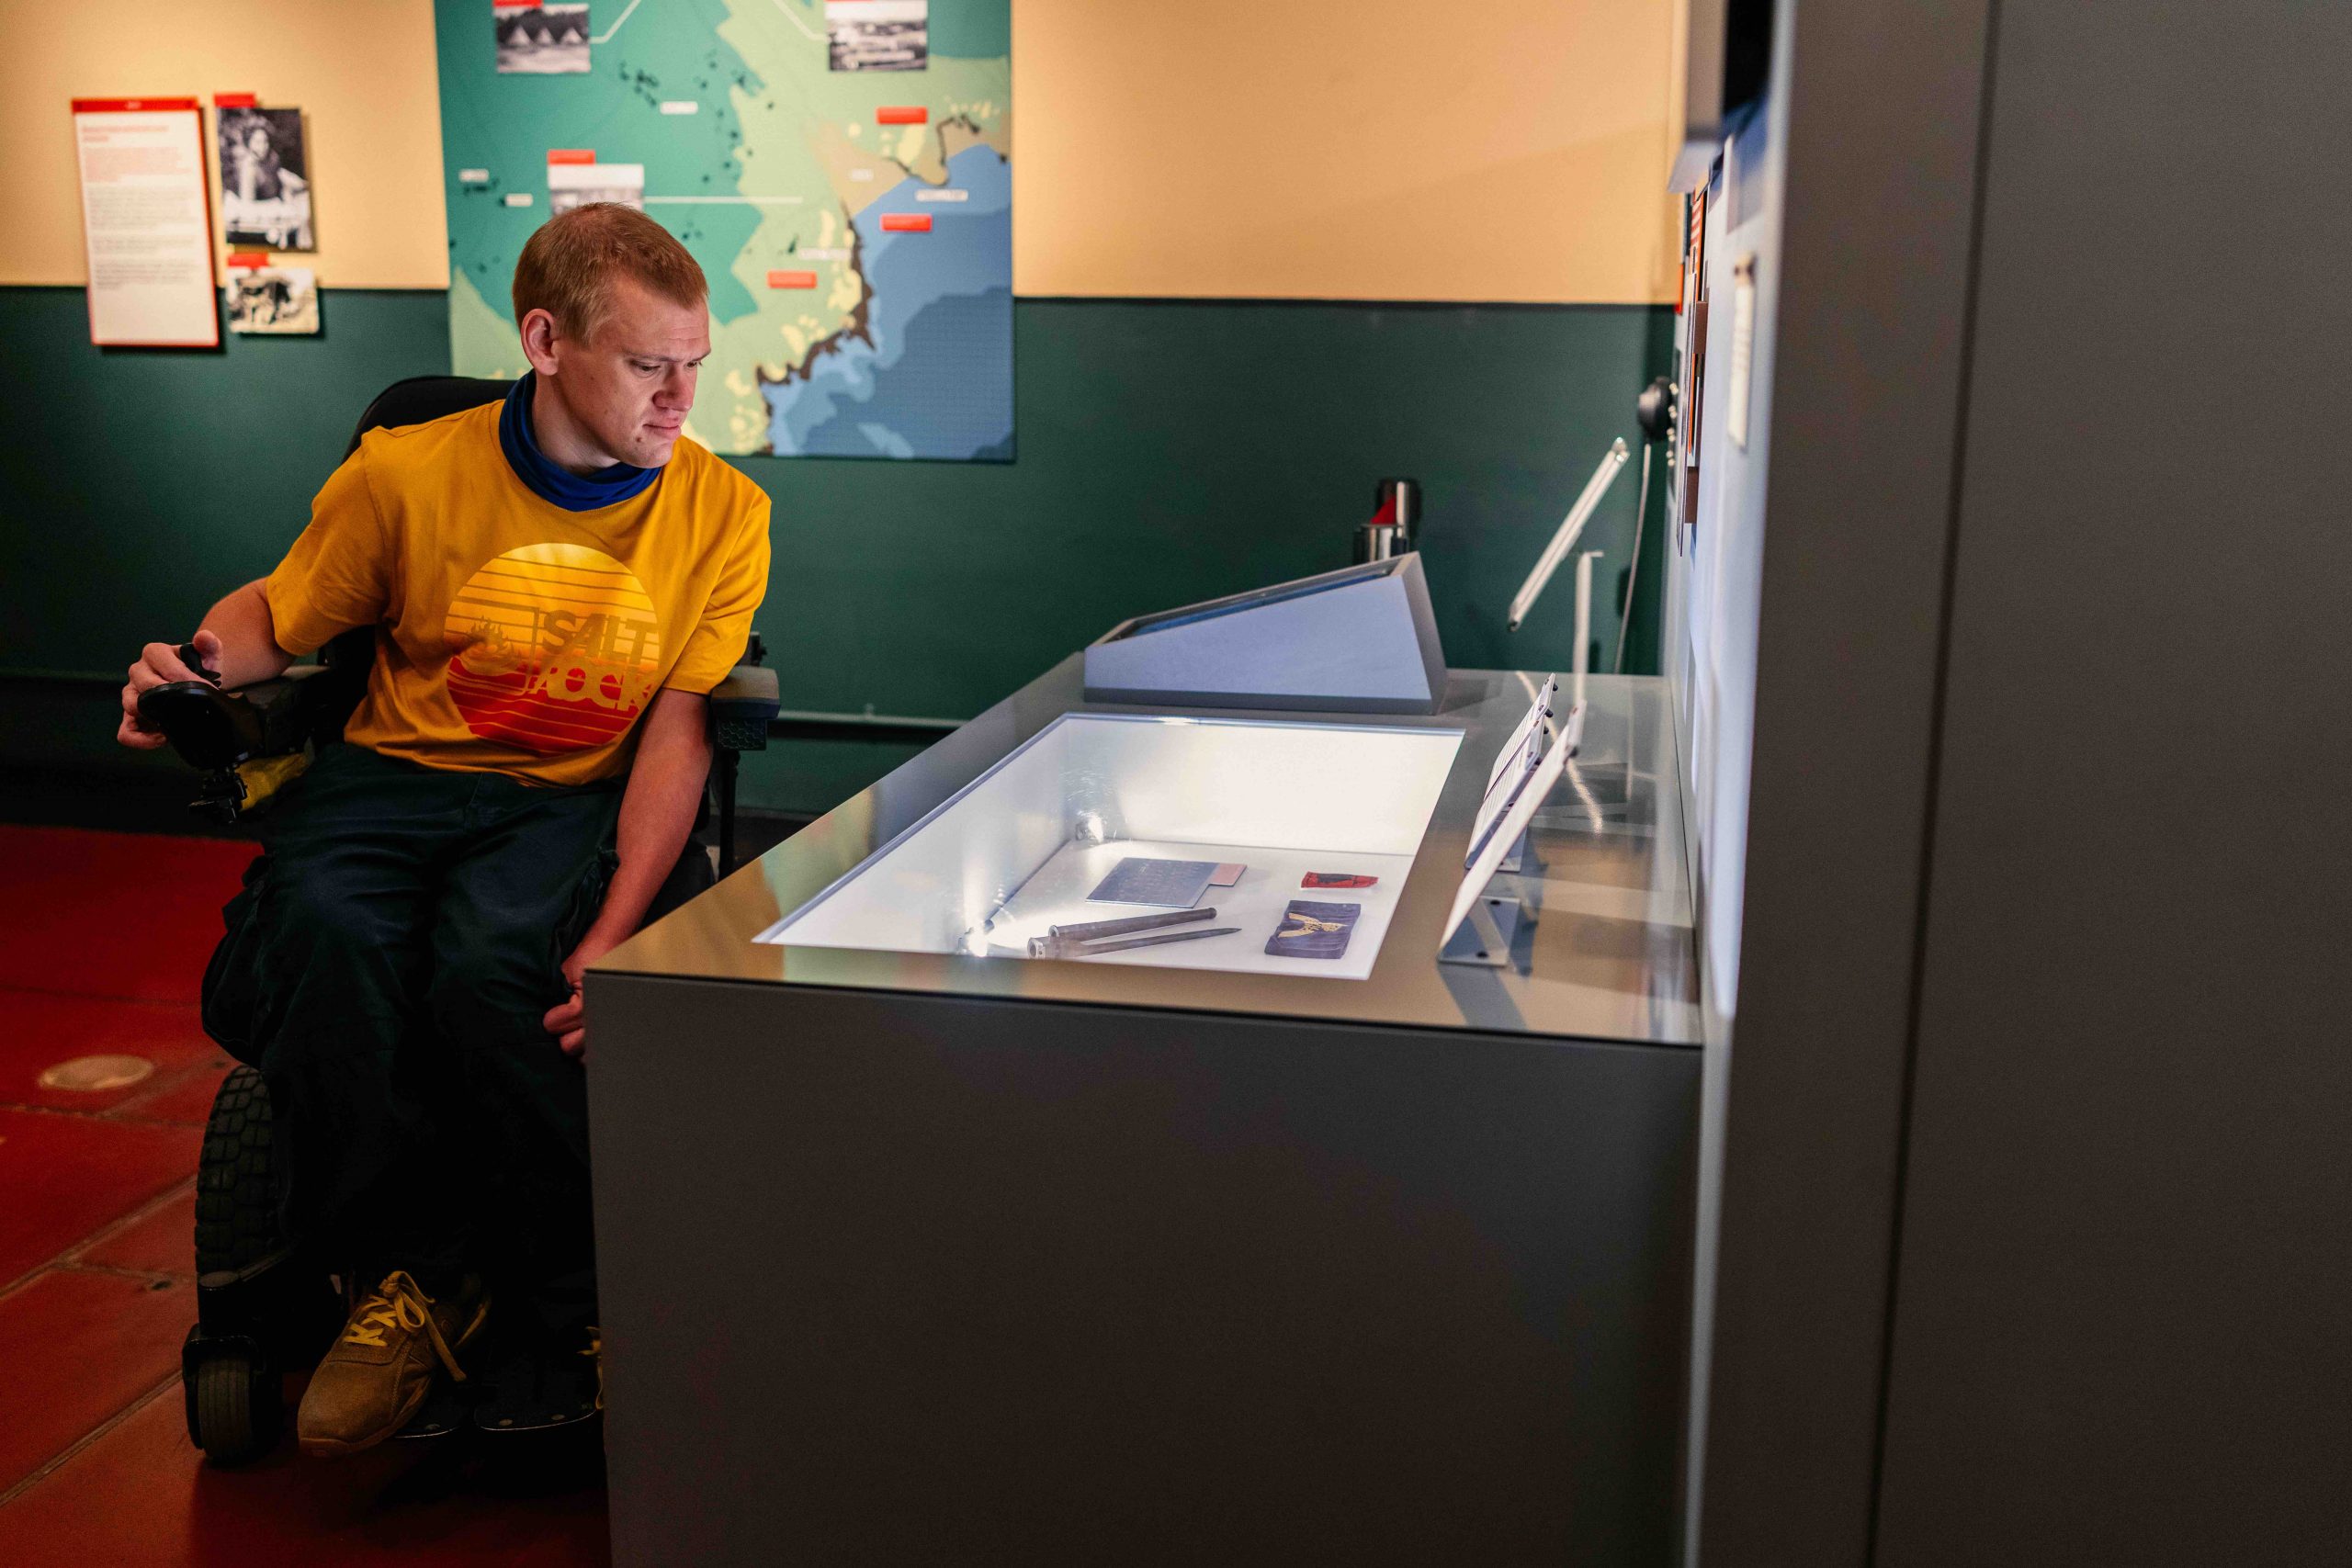 Access Cornwall reviewer Nick Carr explores the PK Porthcurno Museum of Global Communications. Photo by Sam Breeze